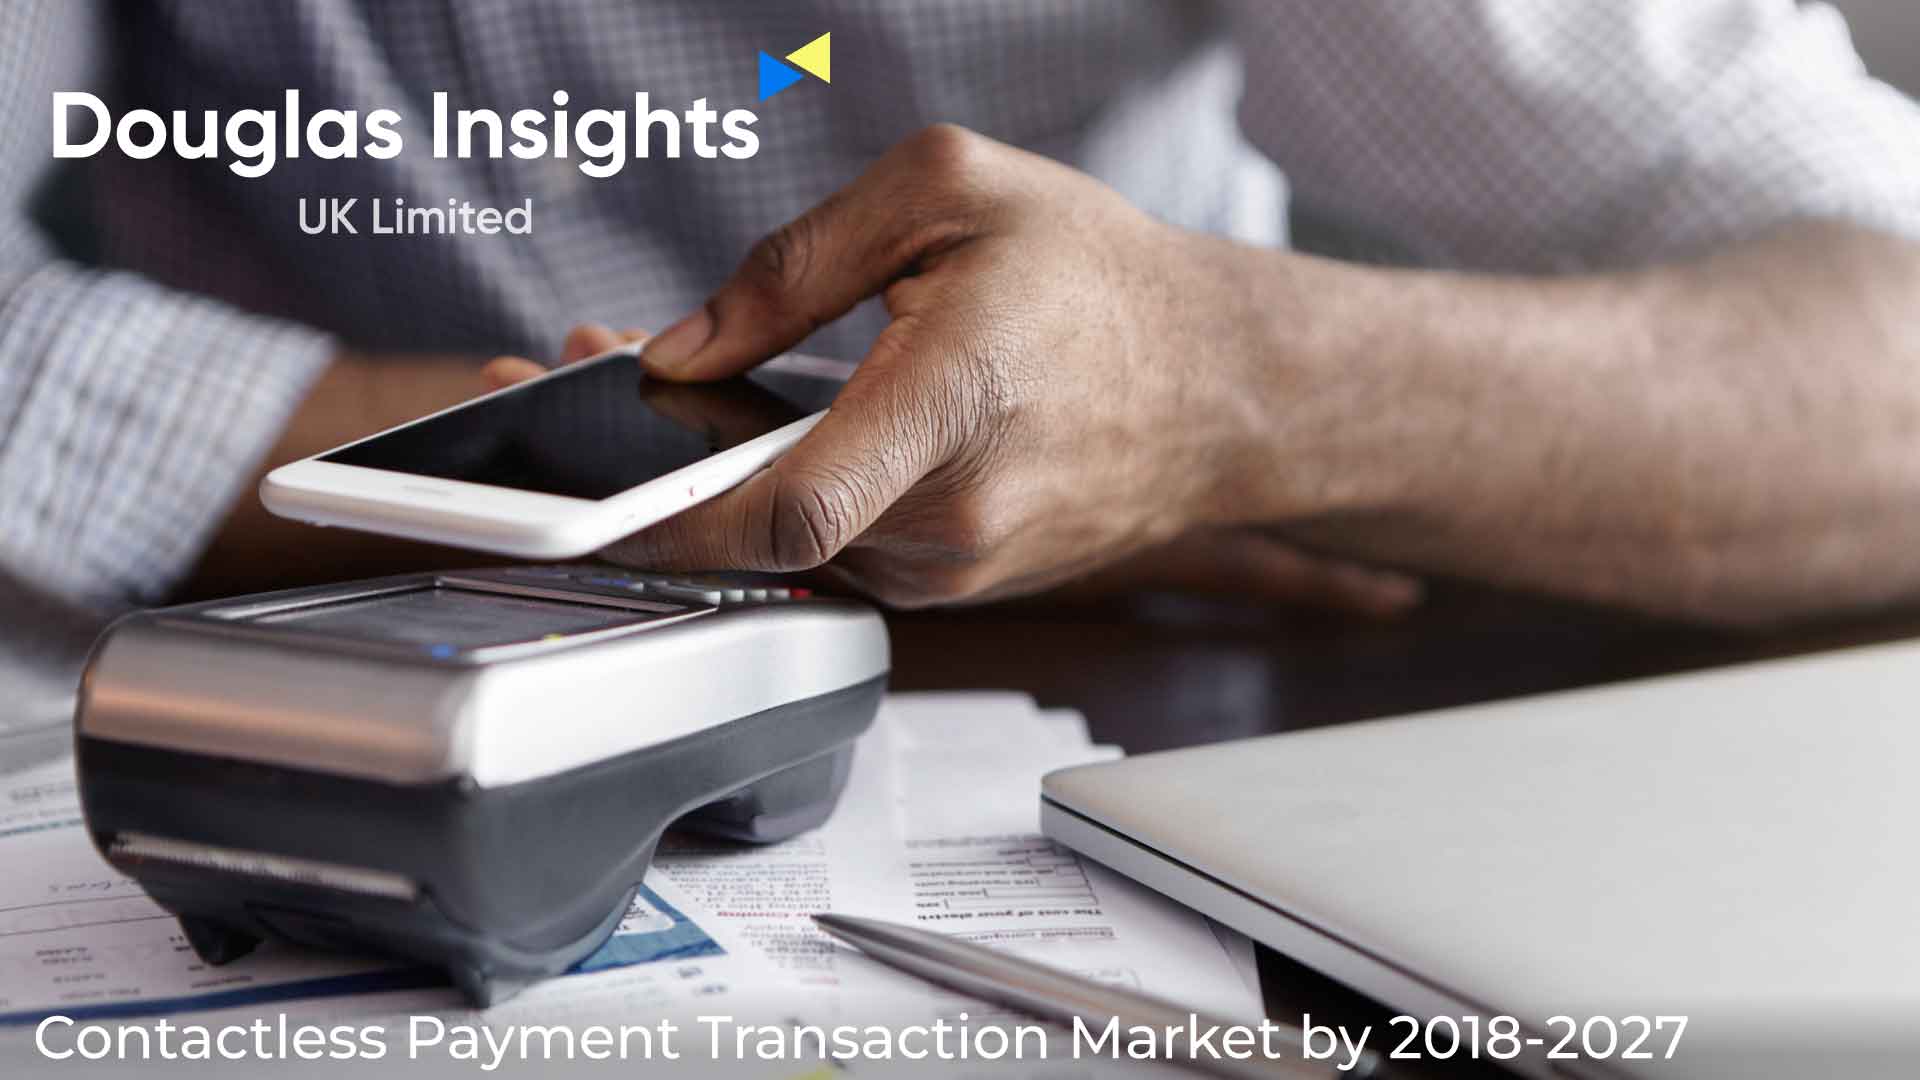 Contactless Payment Transaction Market Is Estimated To Grow At CAGR Of 43.7 %, 2018-2027 | Latest Industry Coverage by Douglas Insights